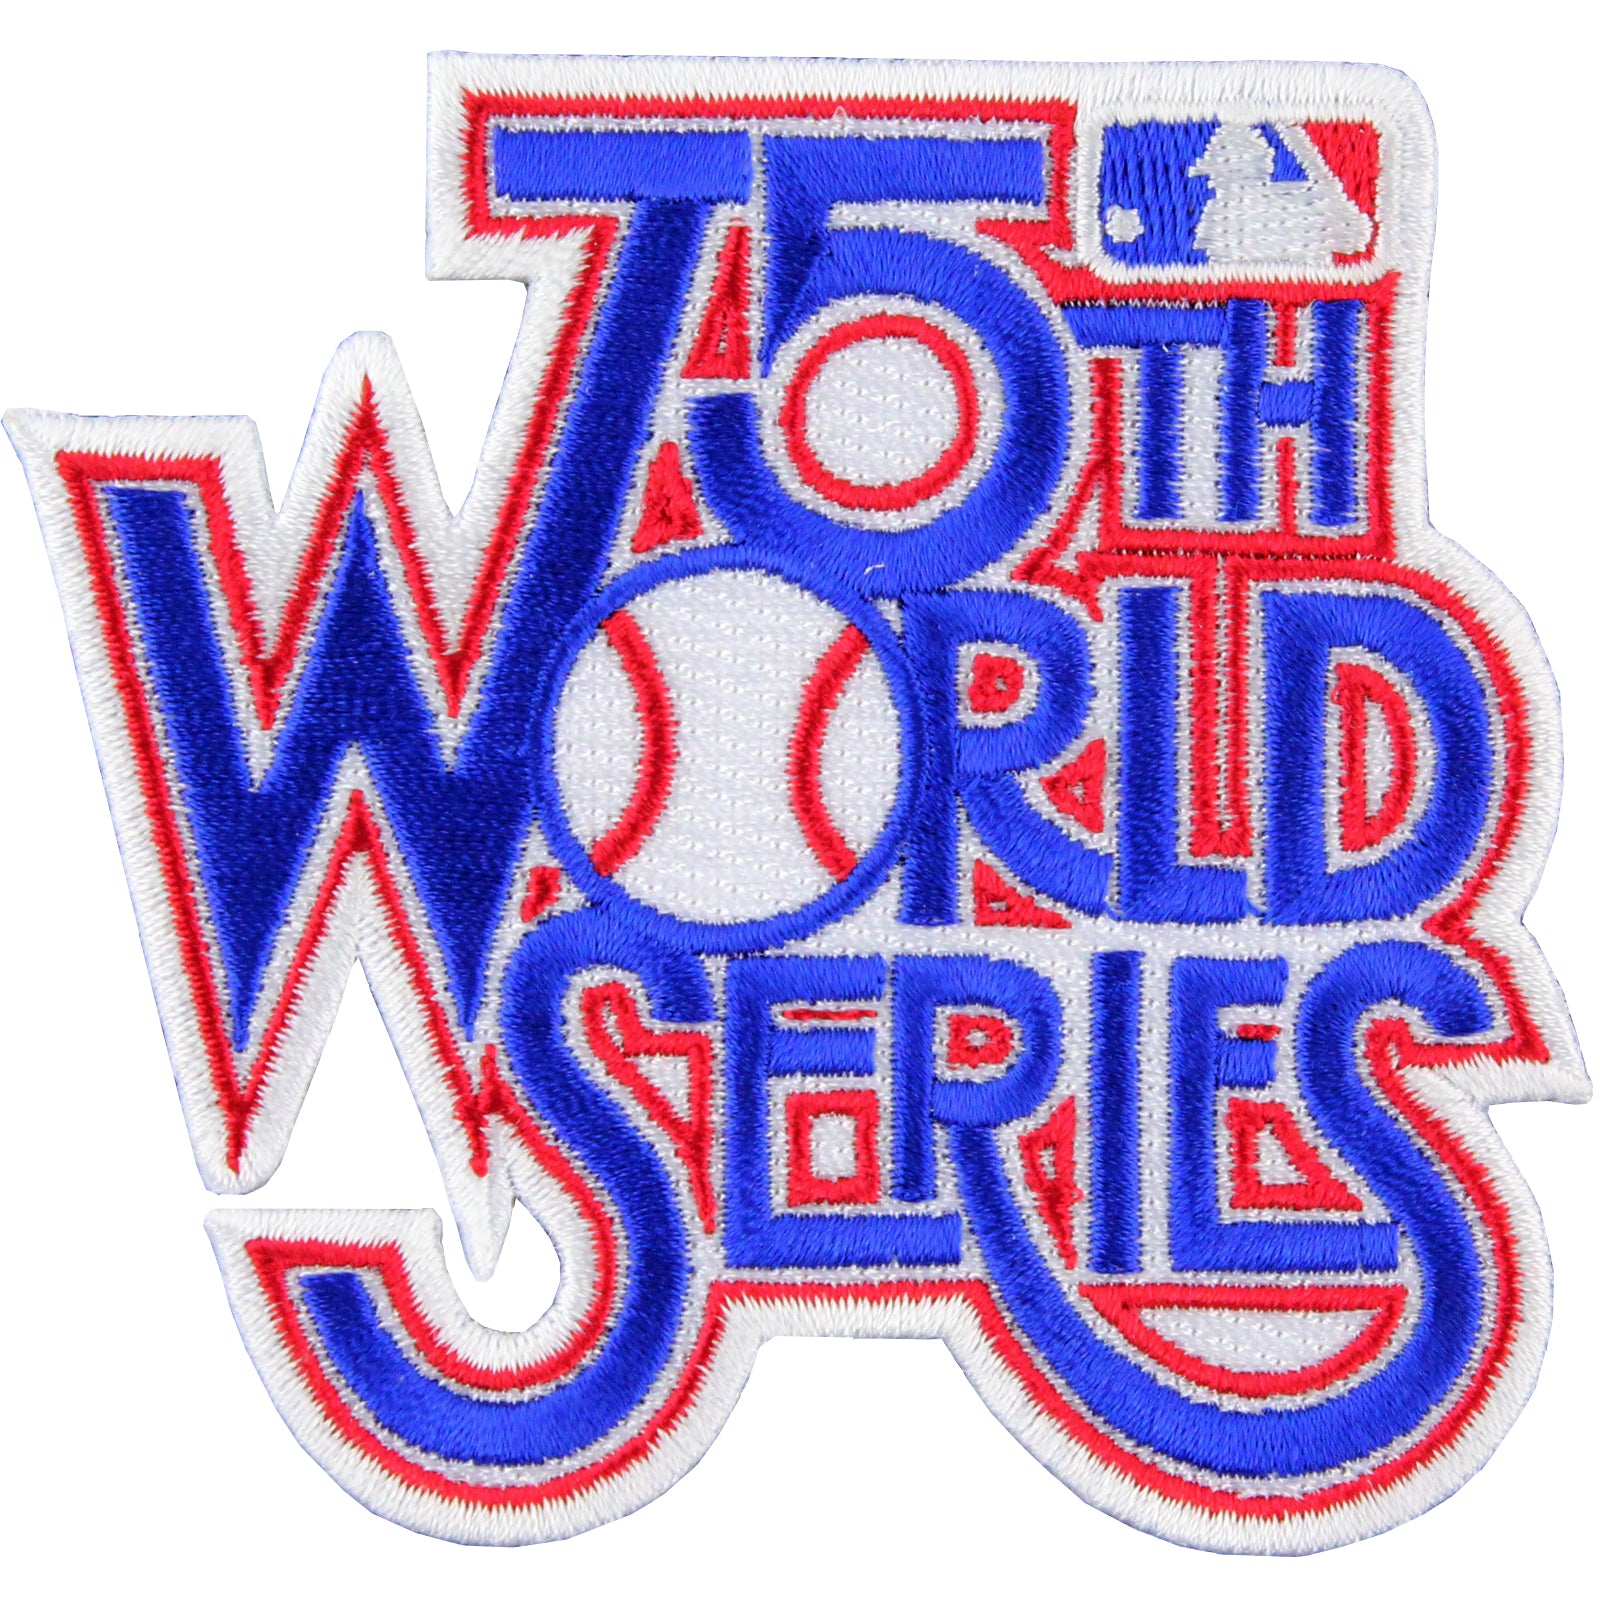 1978 '75th' MLB World Series Logo Jersey Patch Los Angeles Dodgers vs. New York Yankees by Patch Collection